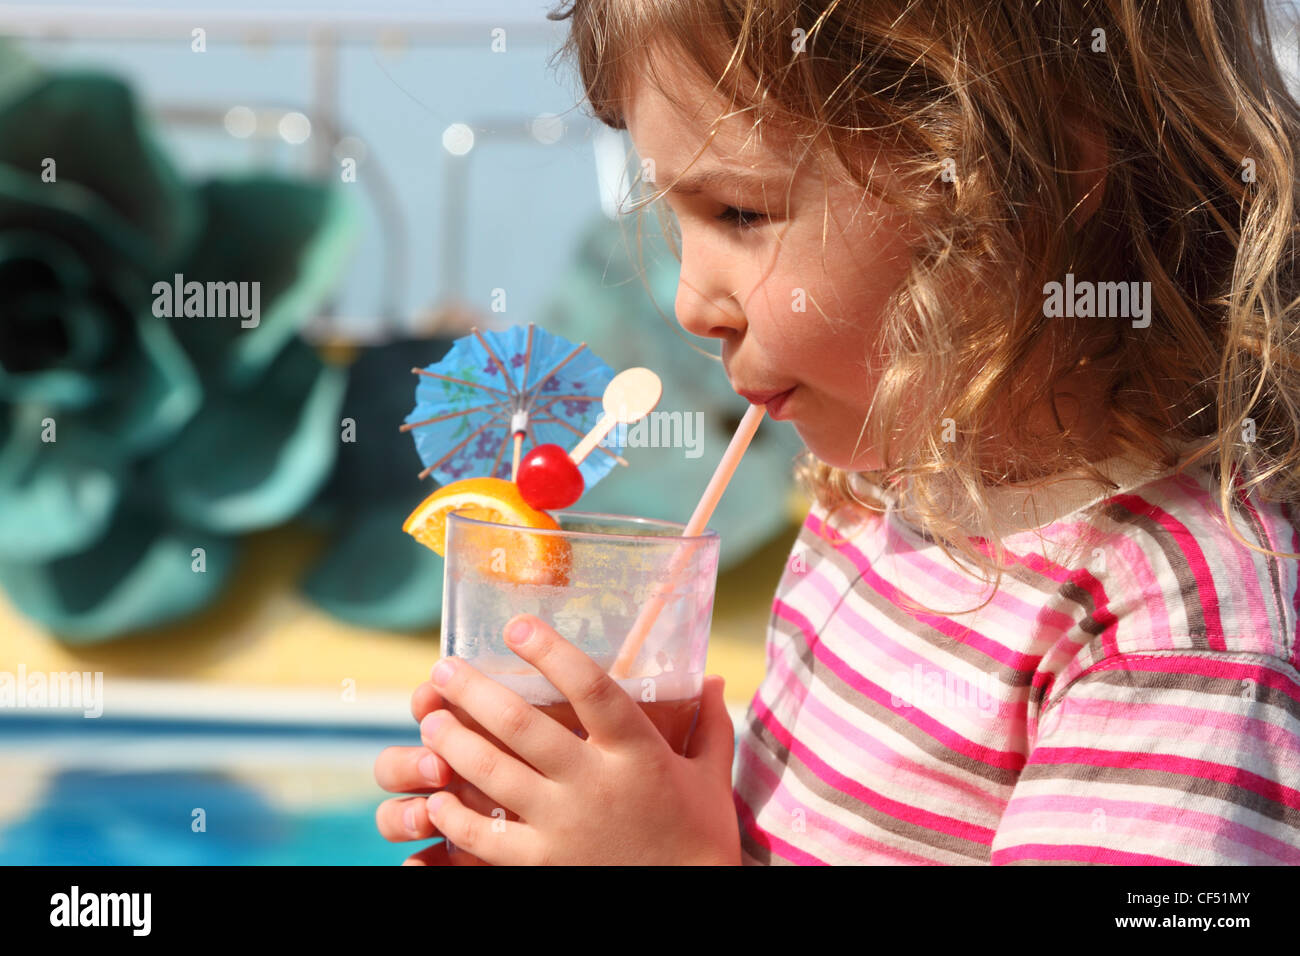 little girl in shirt with pink stripes drinking cocktail with fruits, side view Stock Photo